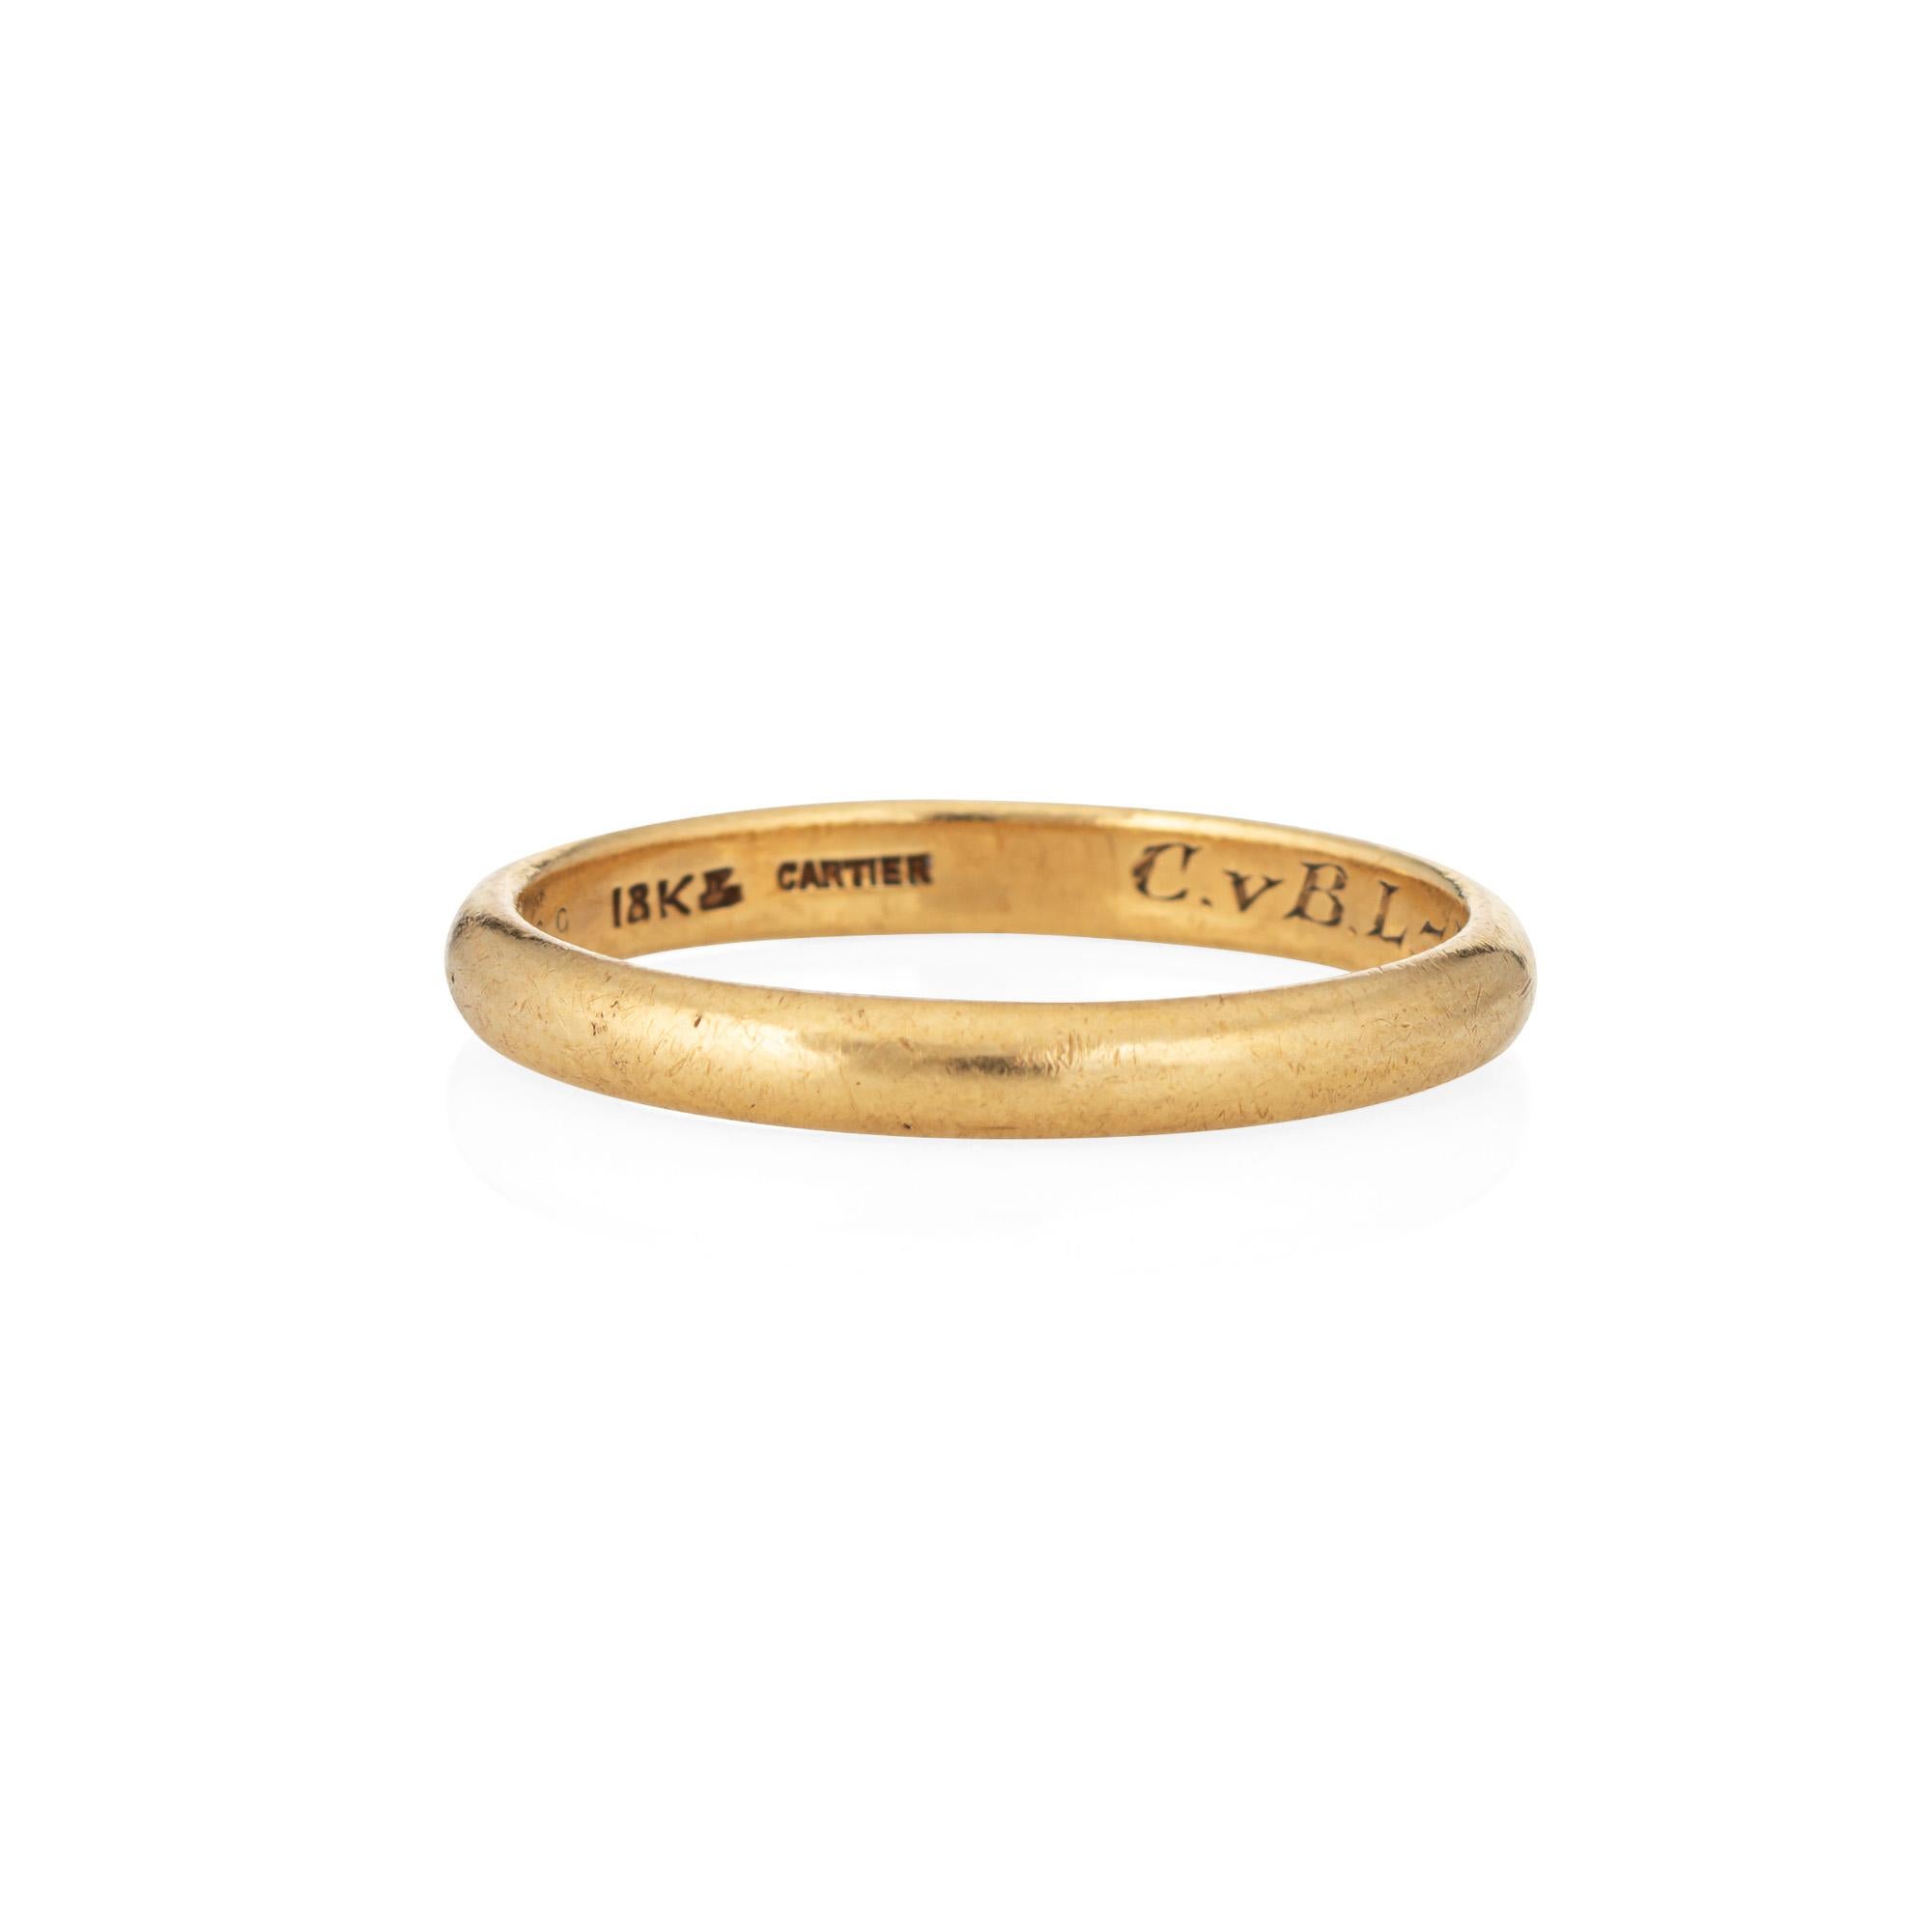 Vintage Cartier wedding band crafted in 18k yellow gold.  

The classic Cartier band is 3mm wide and ideal worn as a wedding band or ring for everyday wear. 

The ring is in good condition with light wear evident (light surface abrasions visible